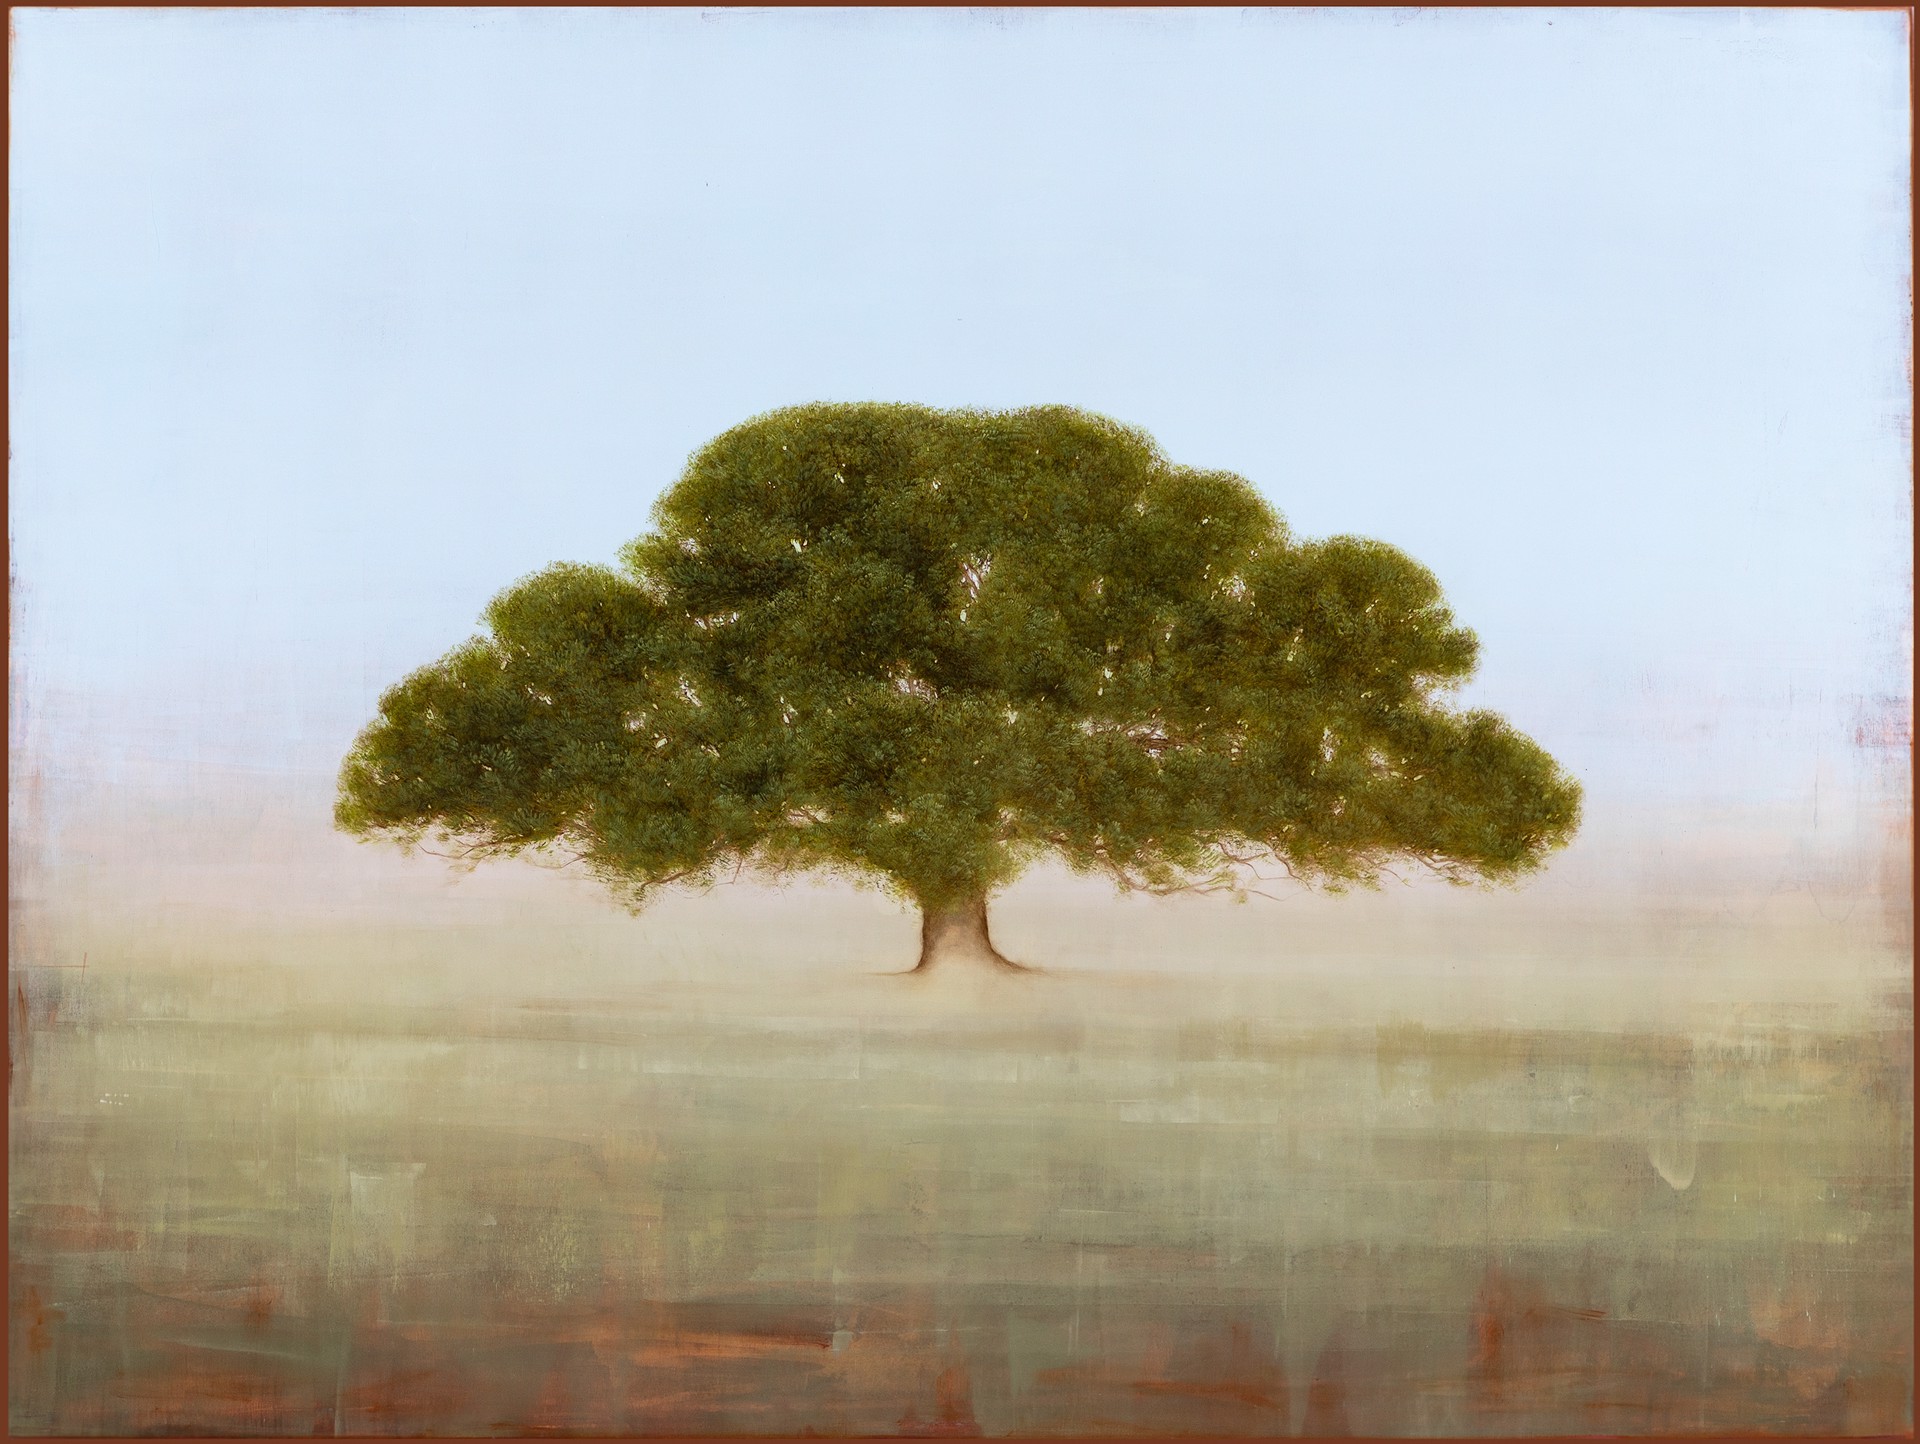 The Giving Tree by Jessica Pisano